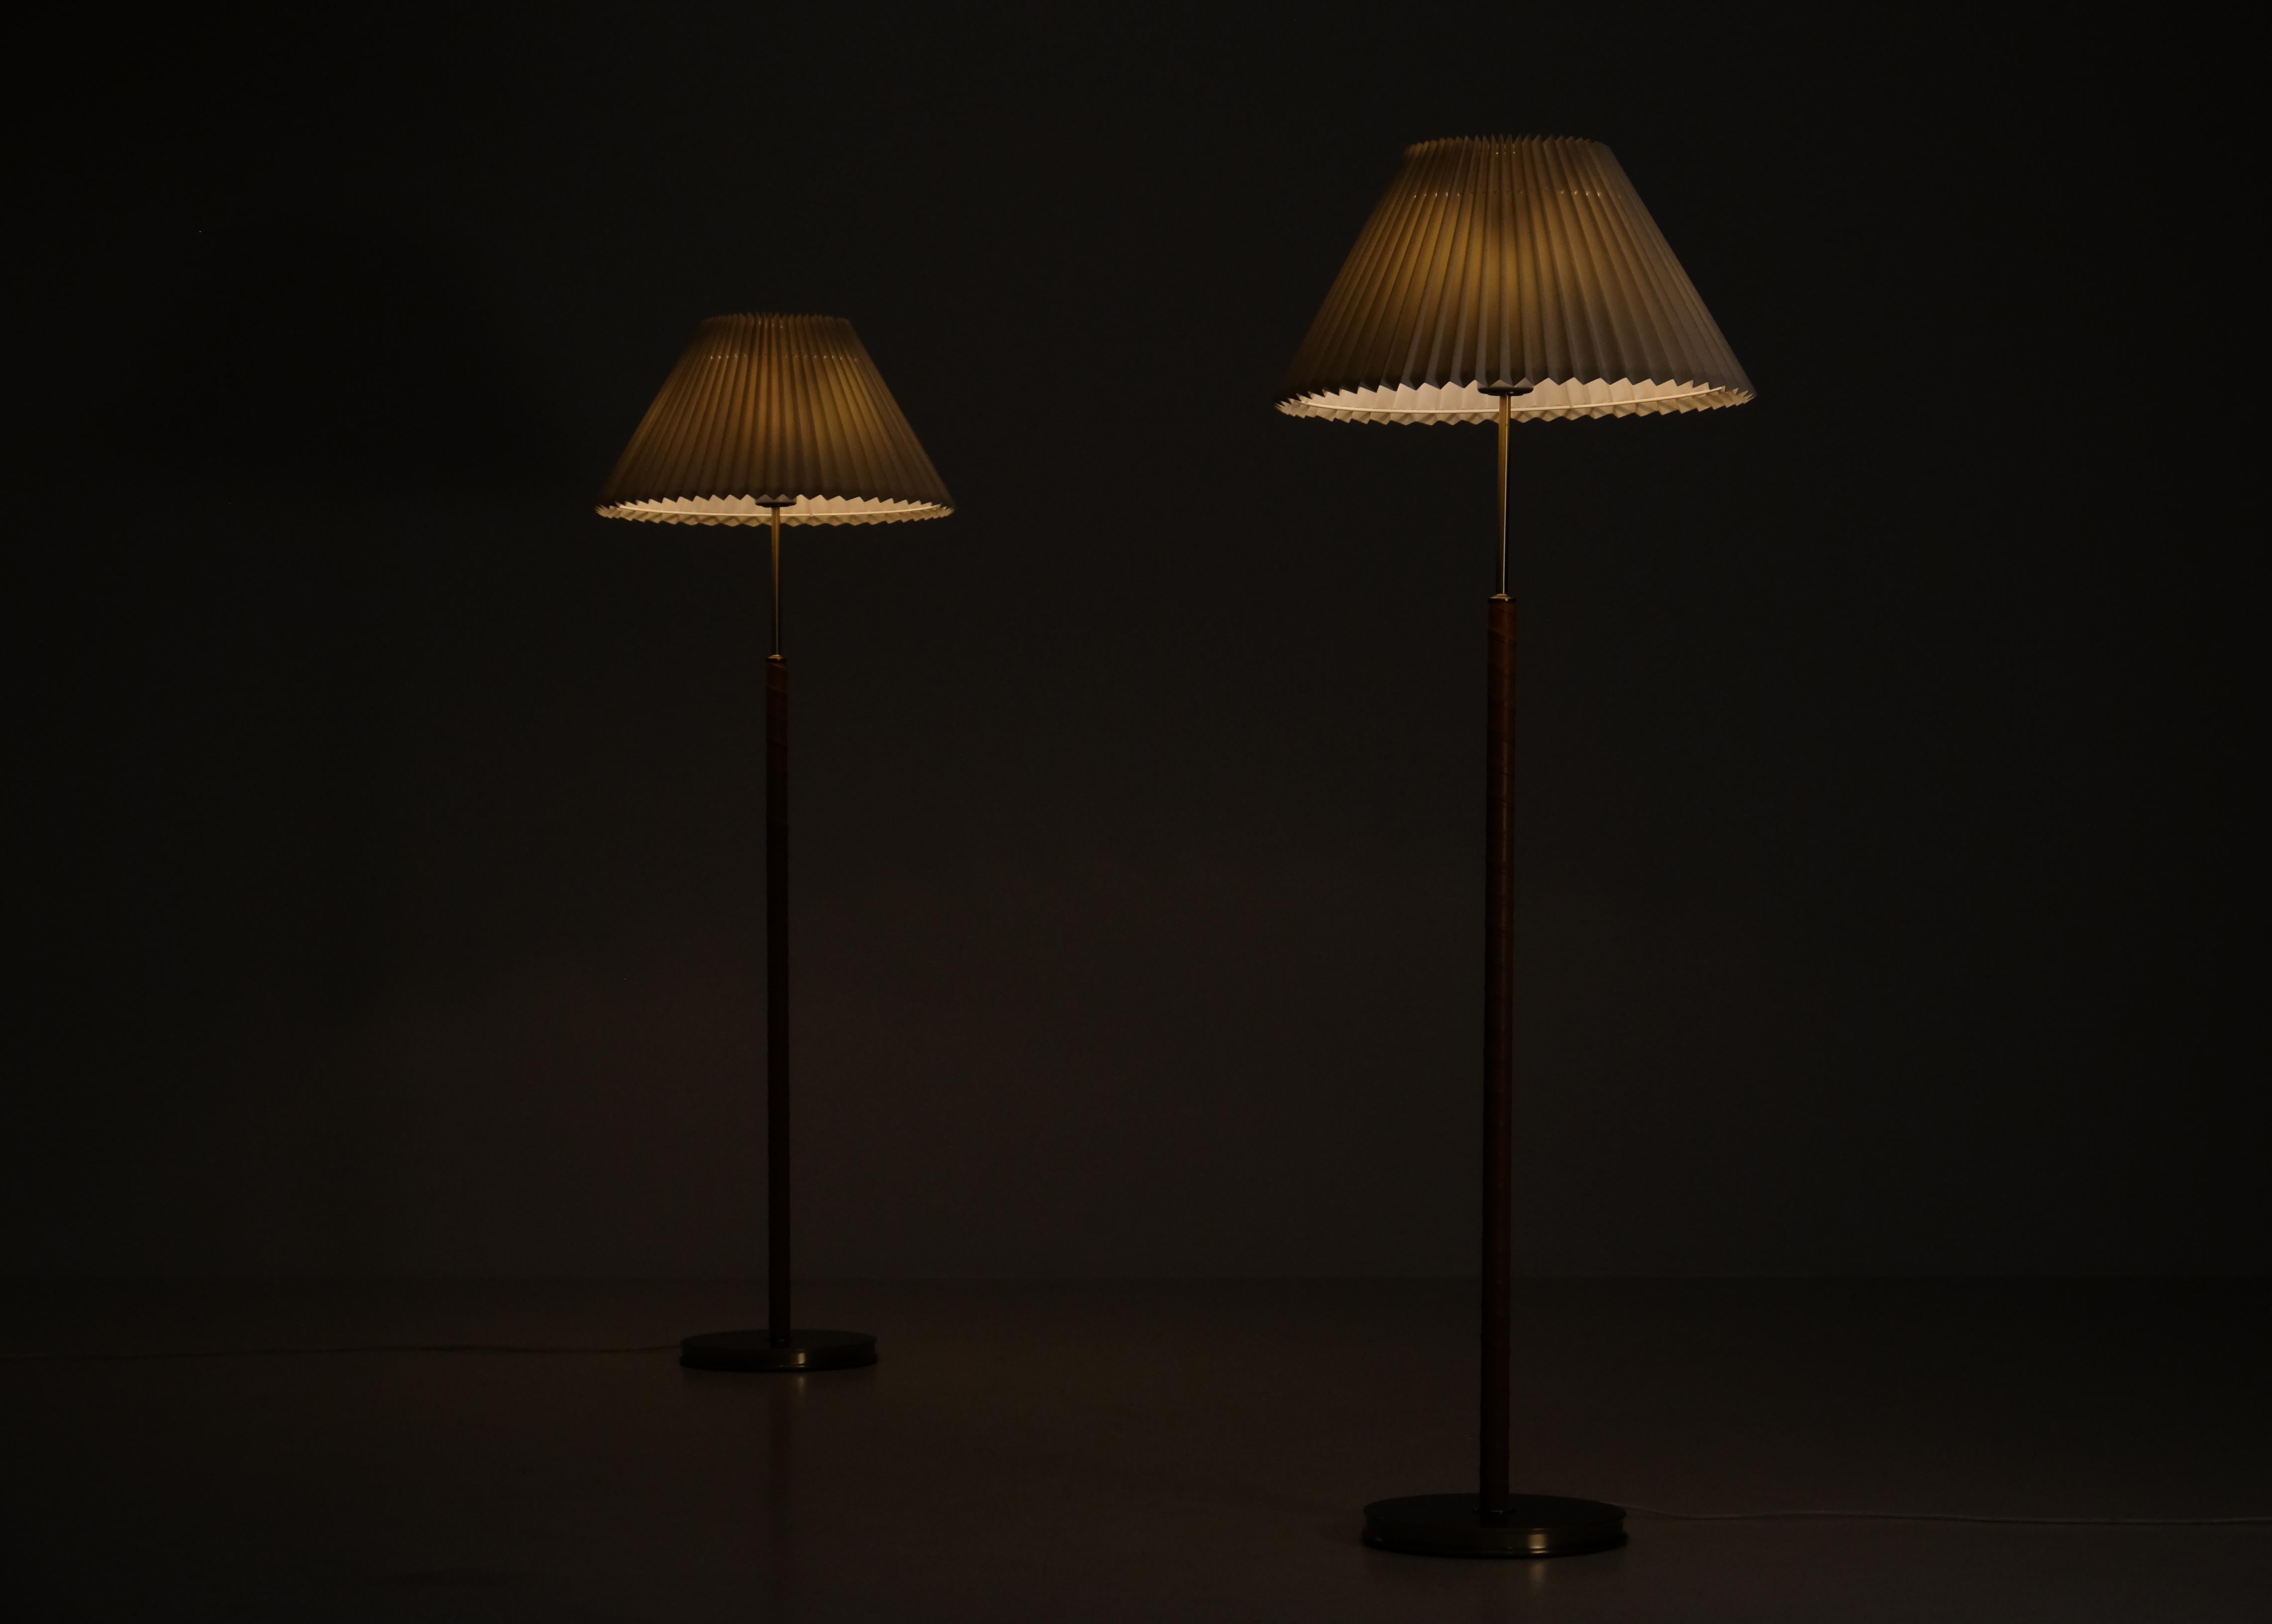 Pair available. Designed by Josef Frank, model 2148, produced by Svenskt Tenn.
With 4 lights each, controlled with two discreet push switches, allowing two different lighting moods. 
With a bespoke ivory fabric tapered shade and leather. 
Please